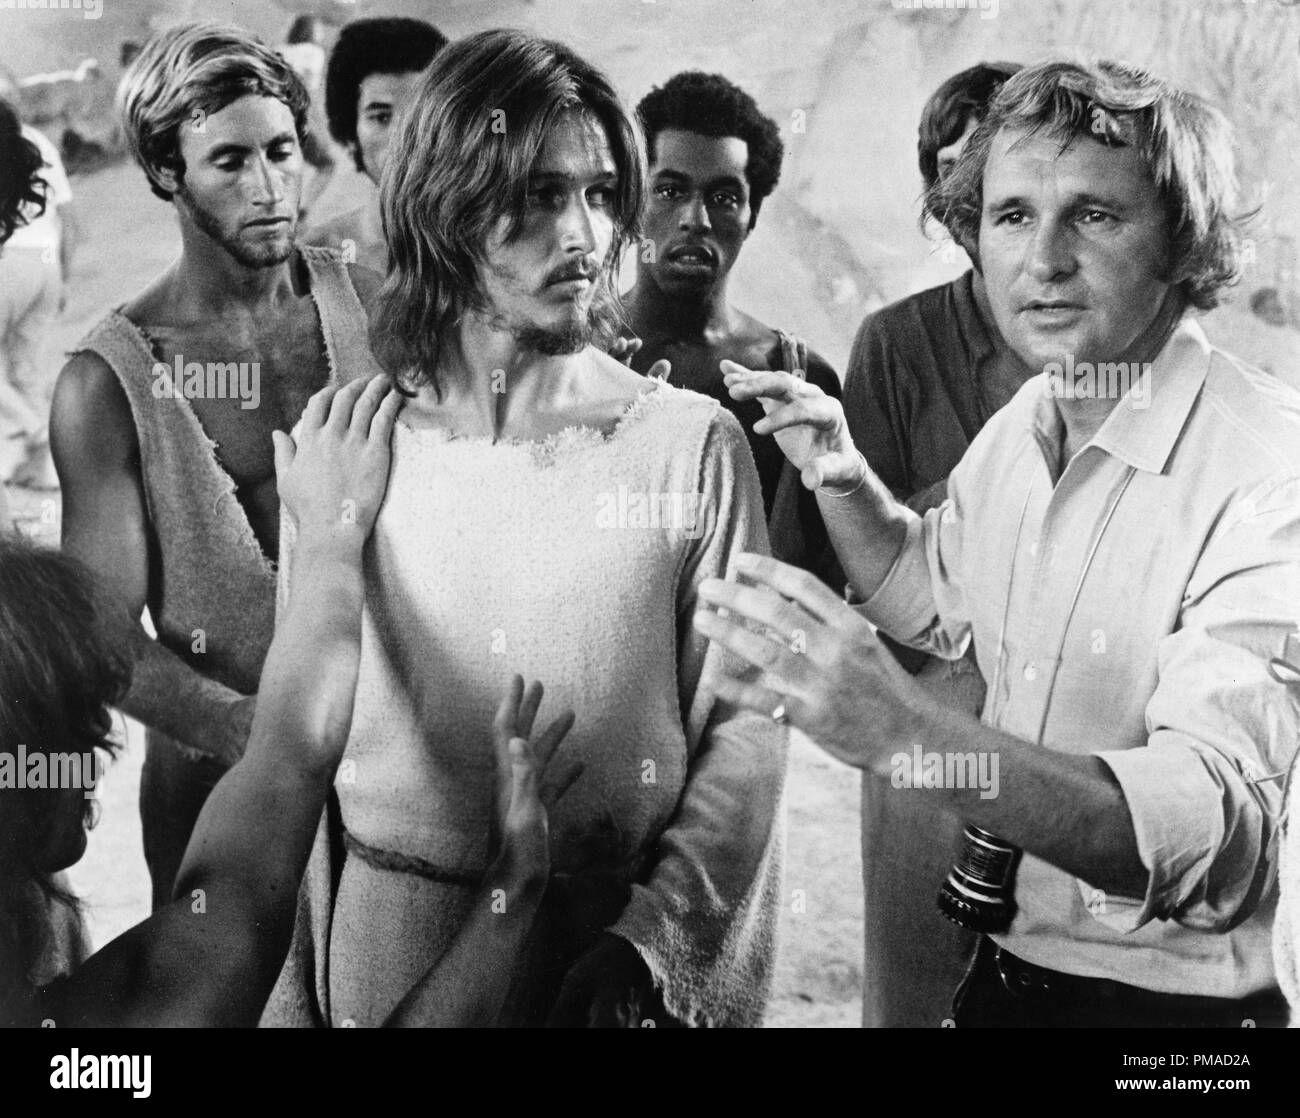 Ted Neeley, Norman Jewison, 'Jesus Christ Superstar', 1973 Universal File Reference # 32368 575 THA Stockfoto